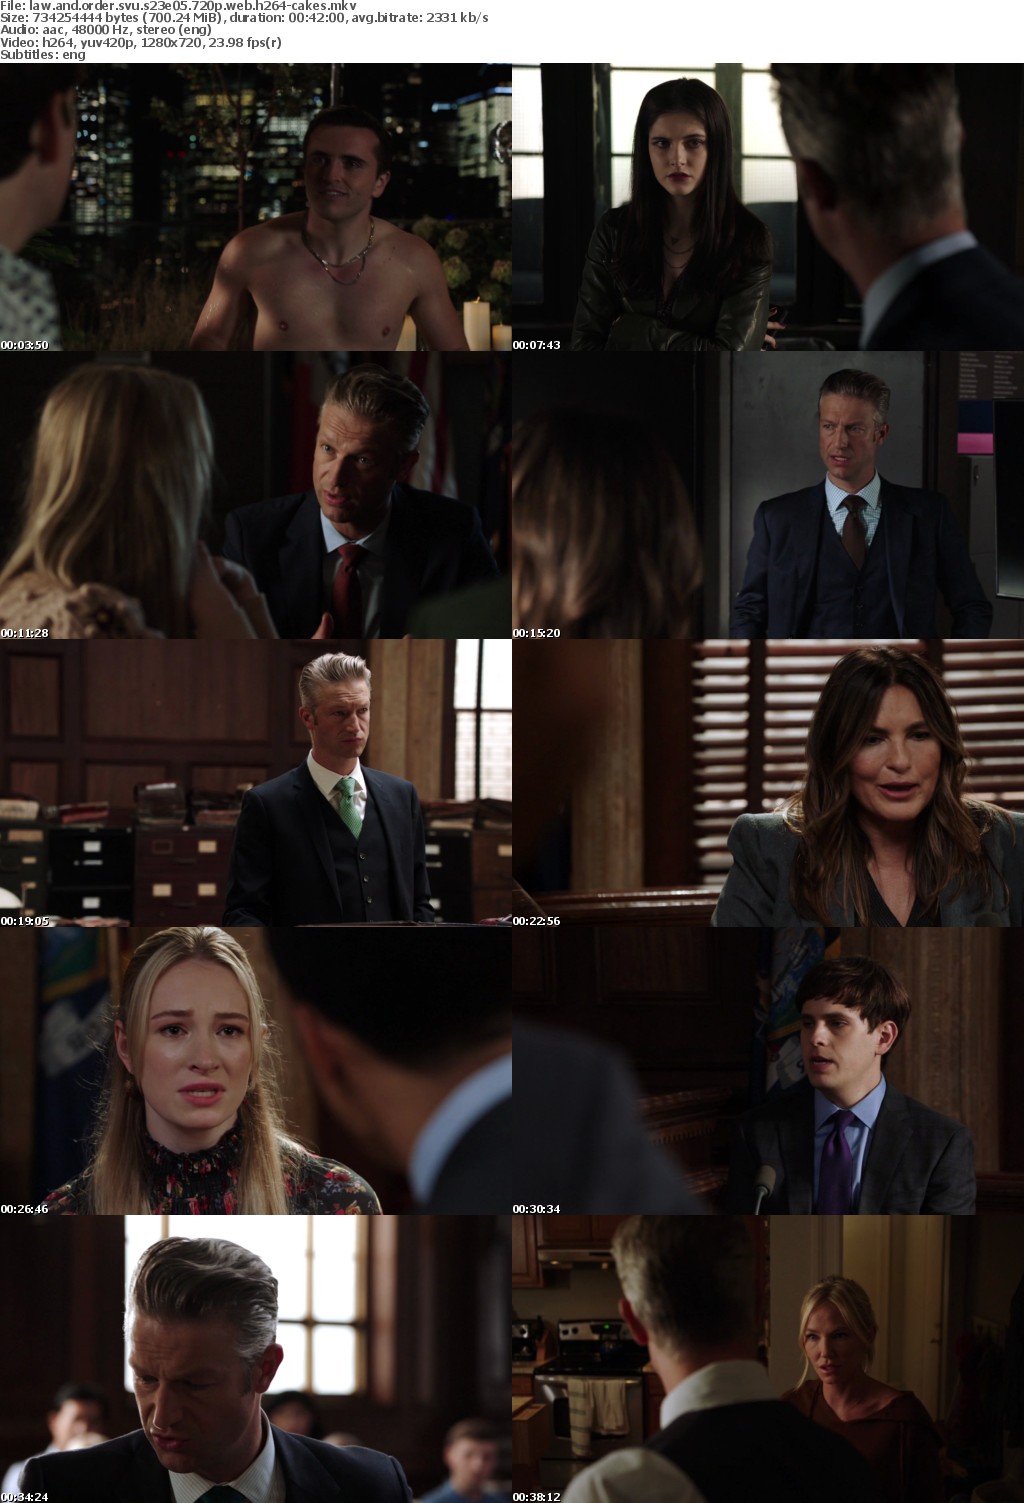 Law and Order SVU S23E05 720p WEB H264-CAKES